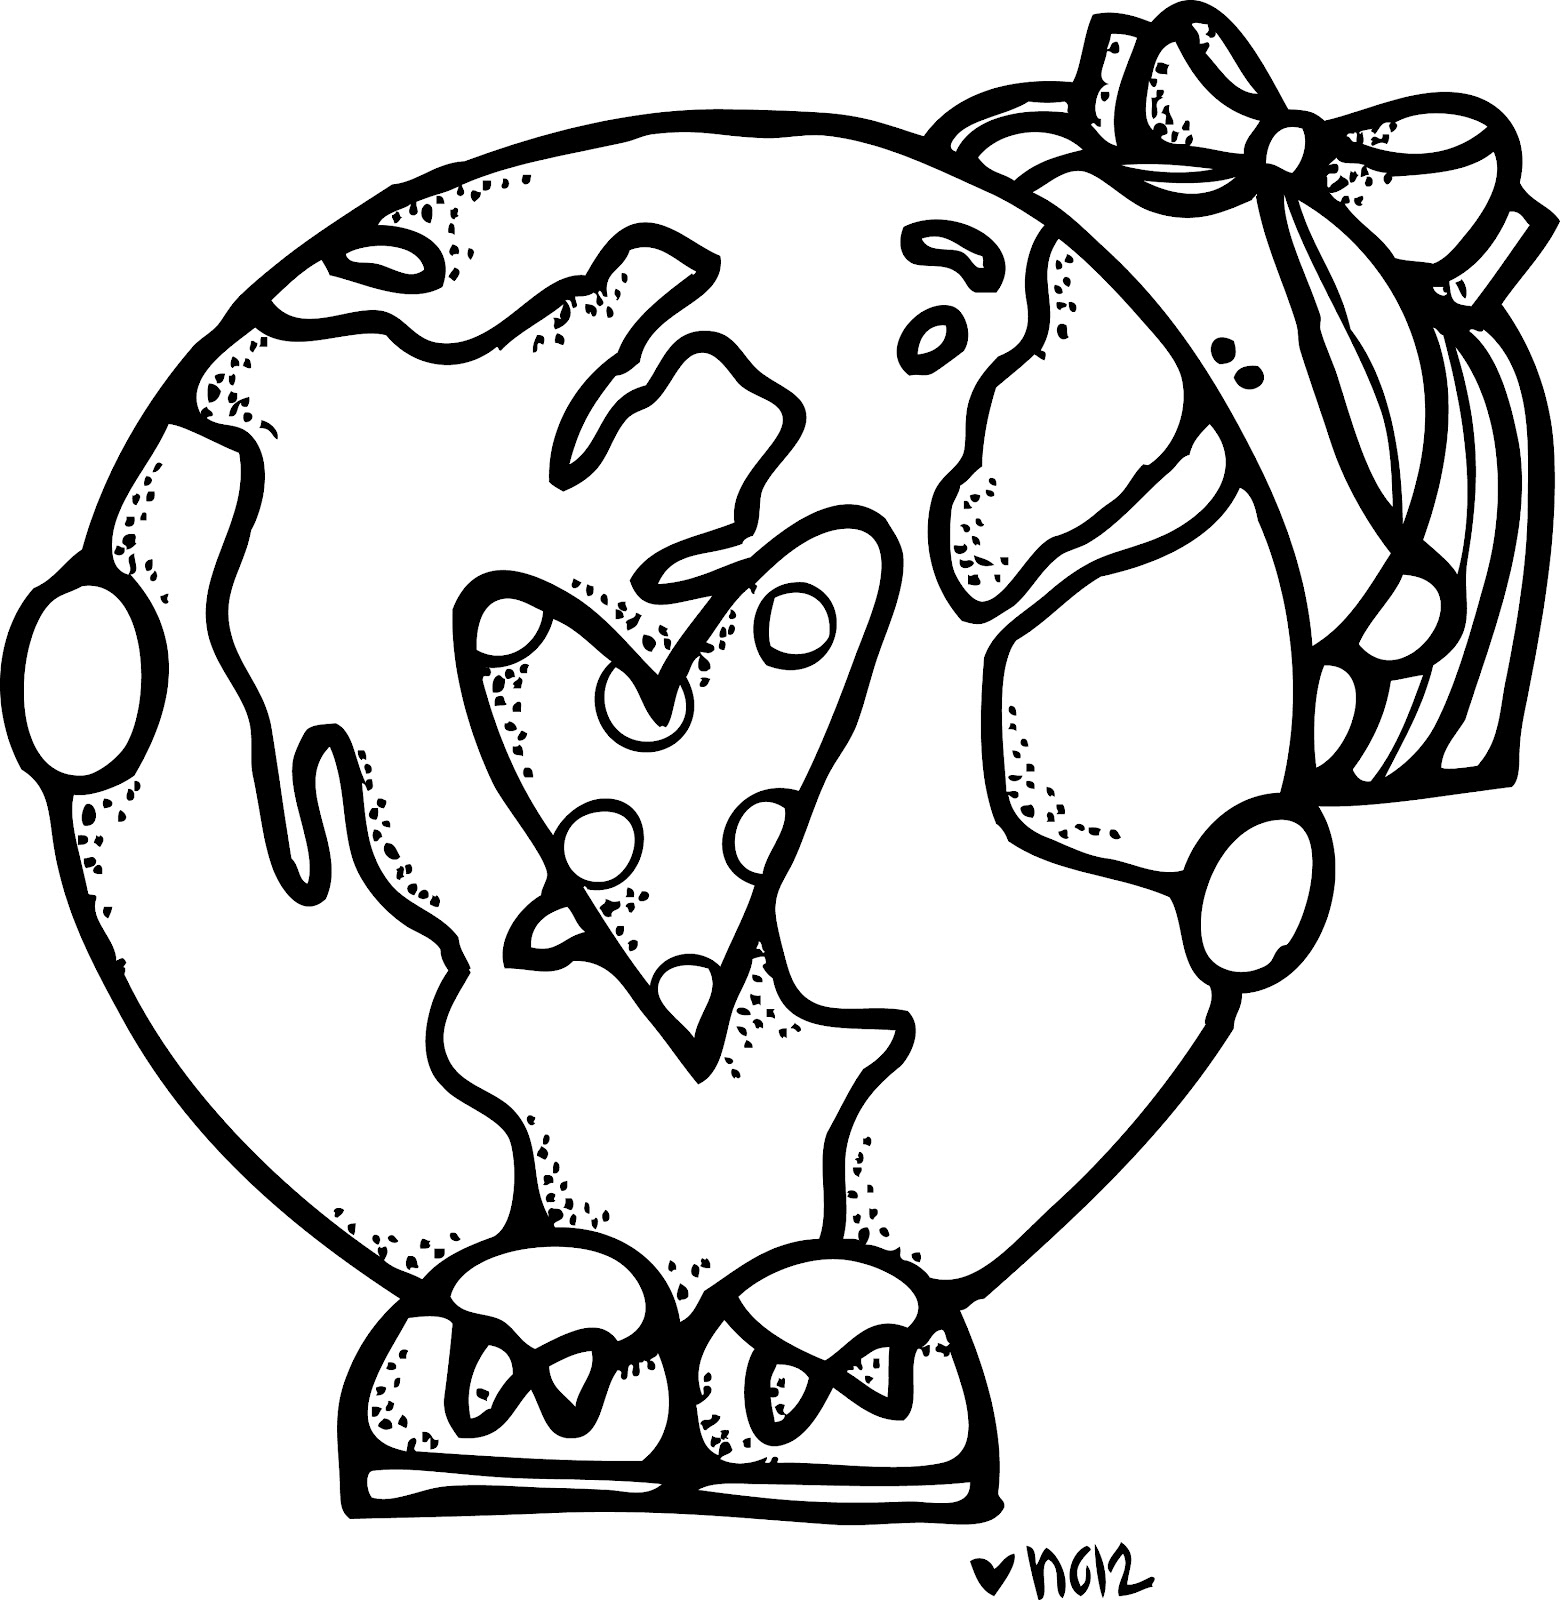 World black and white earth day black and white clipart